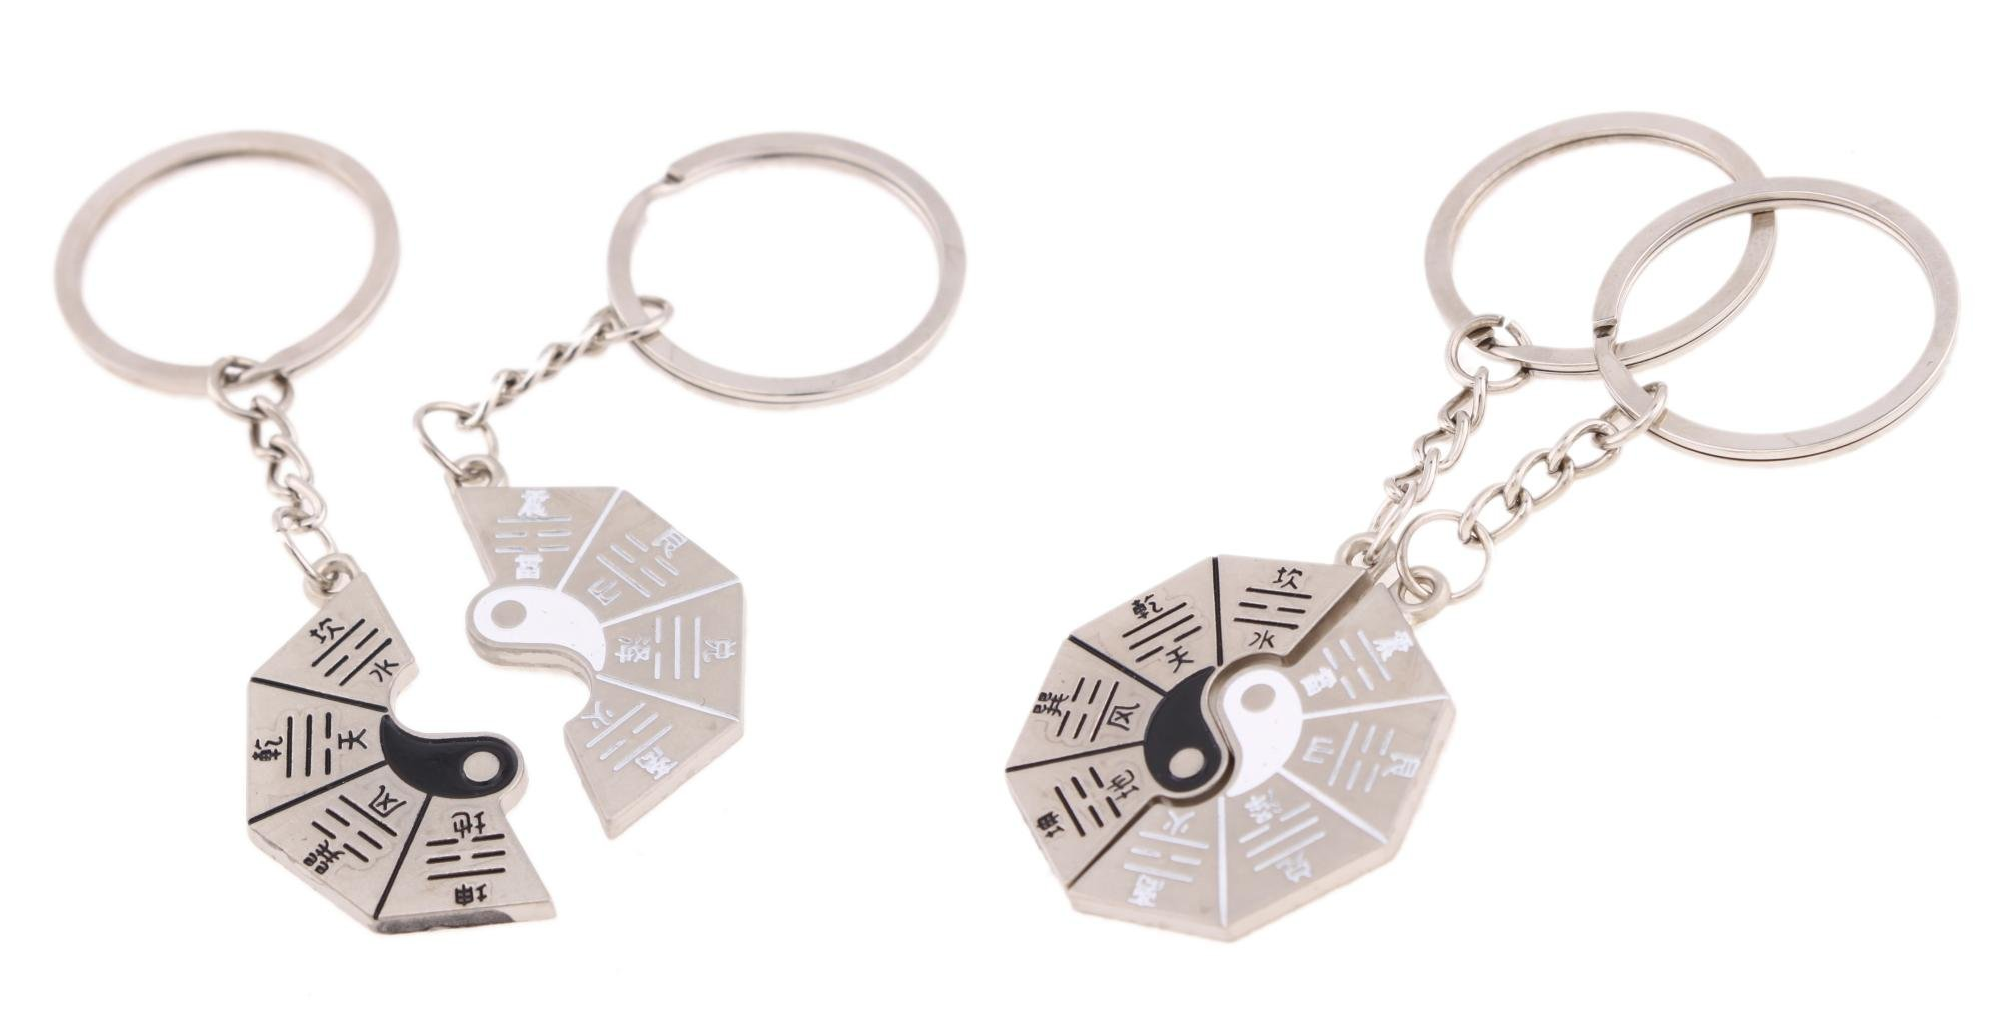 Yin and Yang Couple’s Keychains Only $3.30 Shipped!